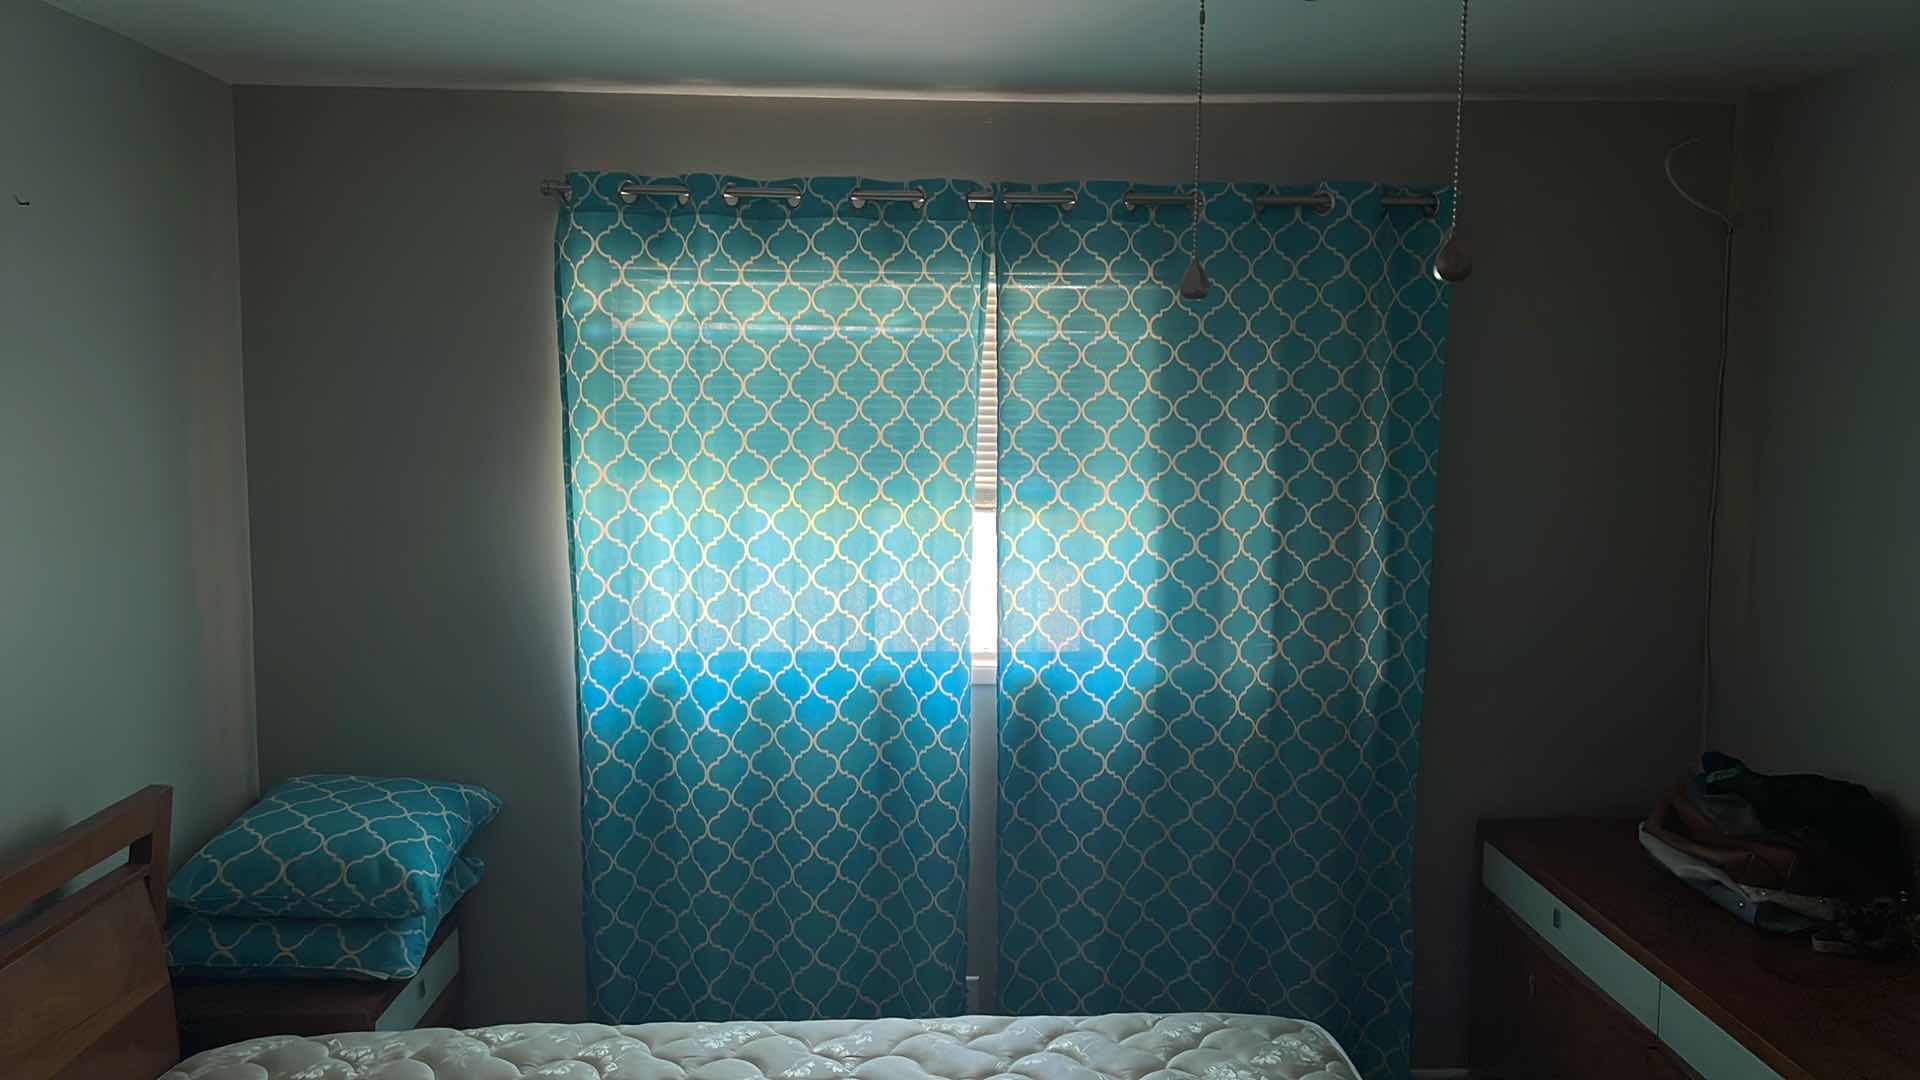 Photo 6 of CURTAINS 50”x 70” AND DECORATIVE PILLOWS 20”x 20”